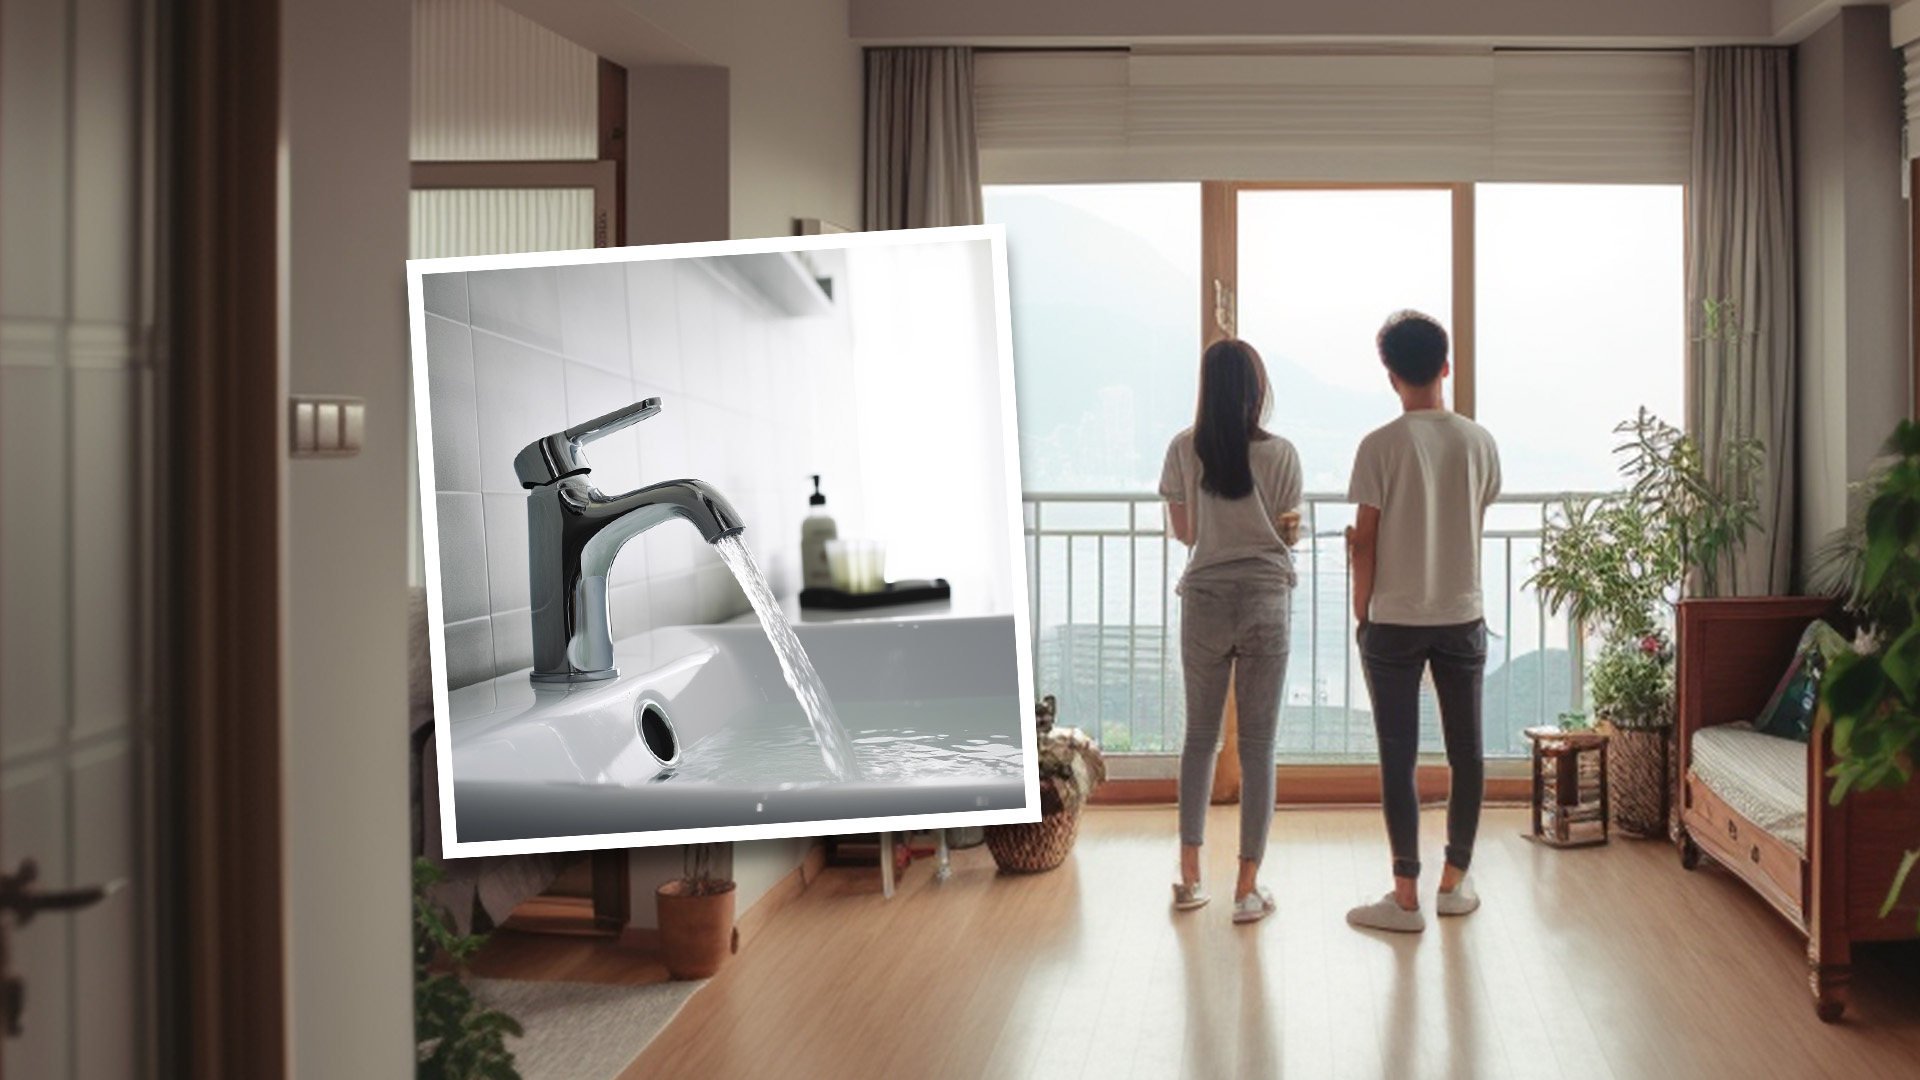 In addition to the bills for water, electricity and gas, there was US$728 in other expenses from the couple’s stay, leaving the host more than US$1,570 out of pocket. Photo: SCMP composite